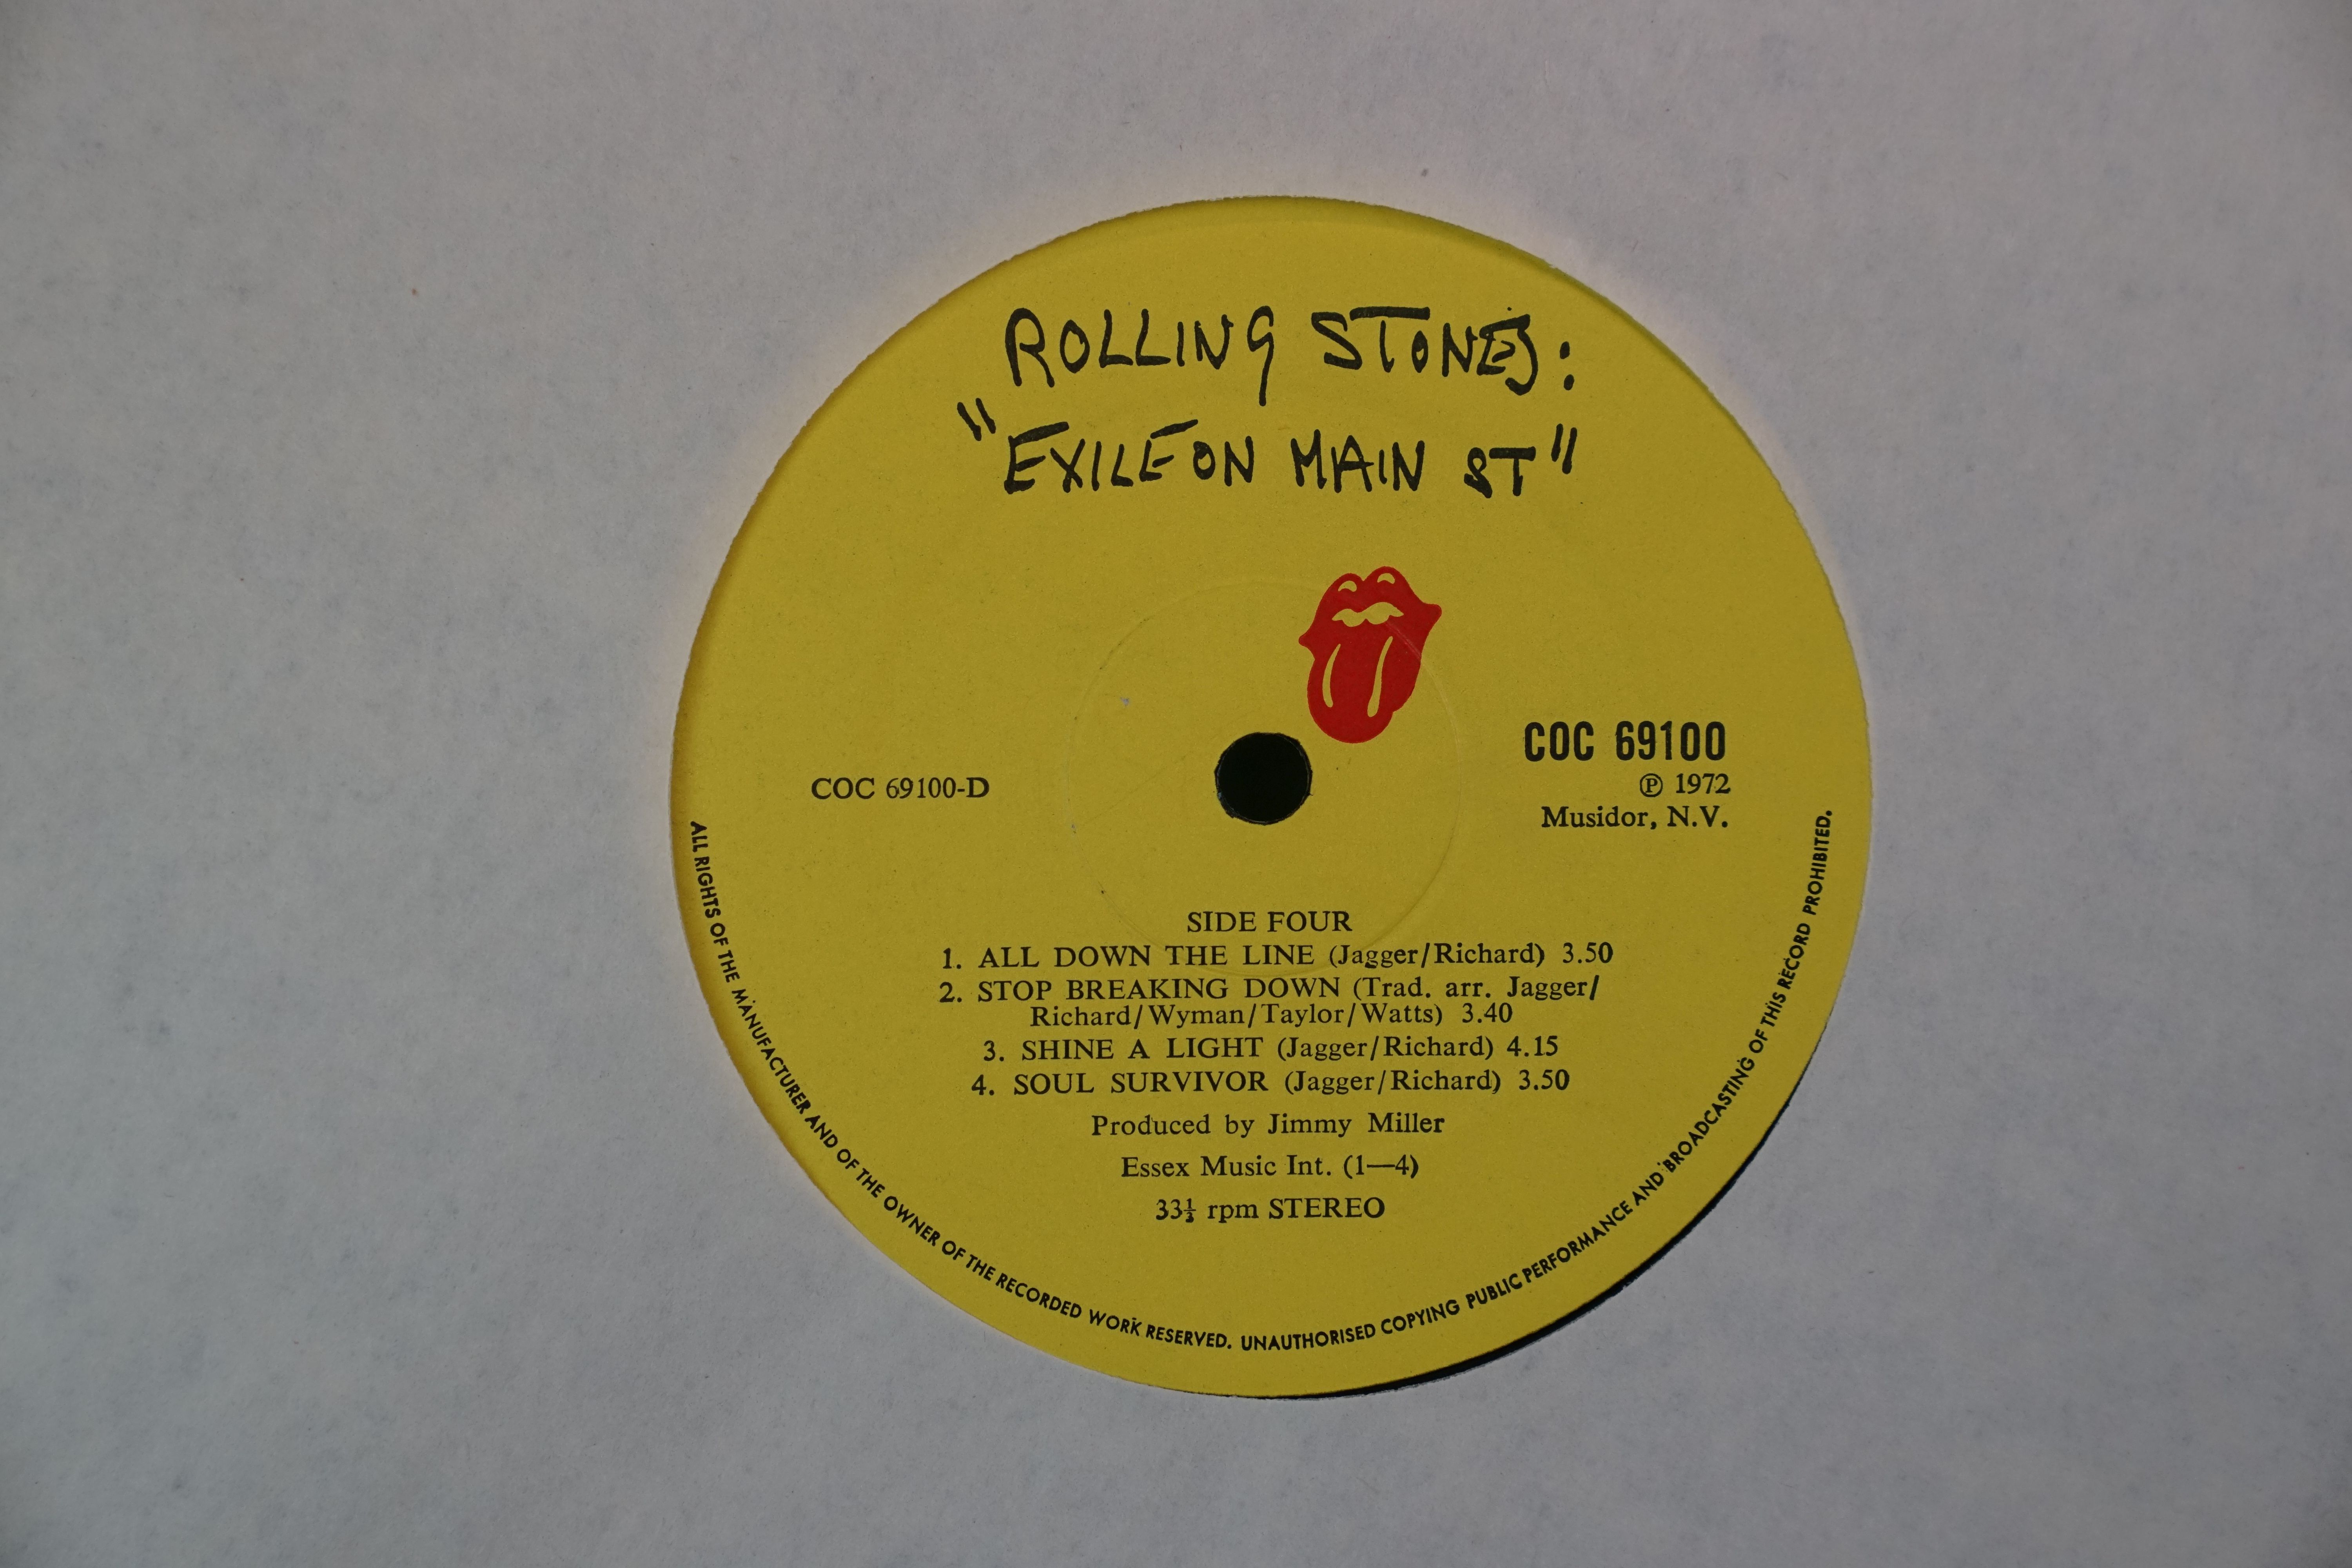 Vinyl - the Rolling Stones Exile on Main Street, no postcards, vinyl and sleeves vg - Image 13 of 16